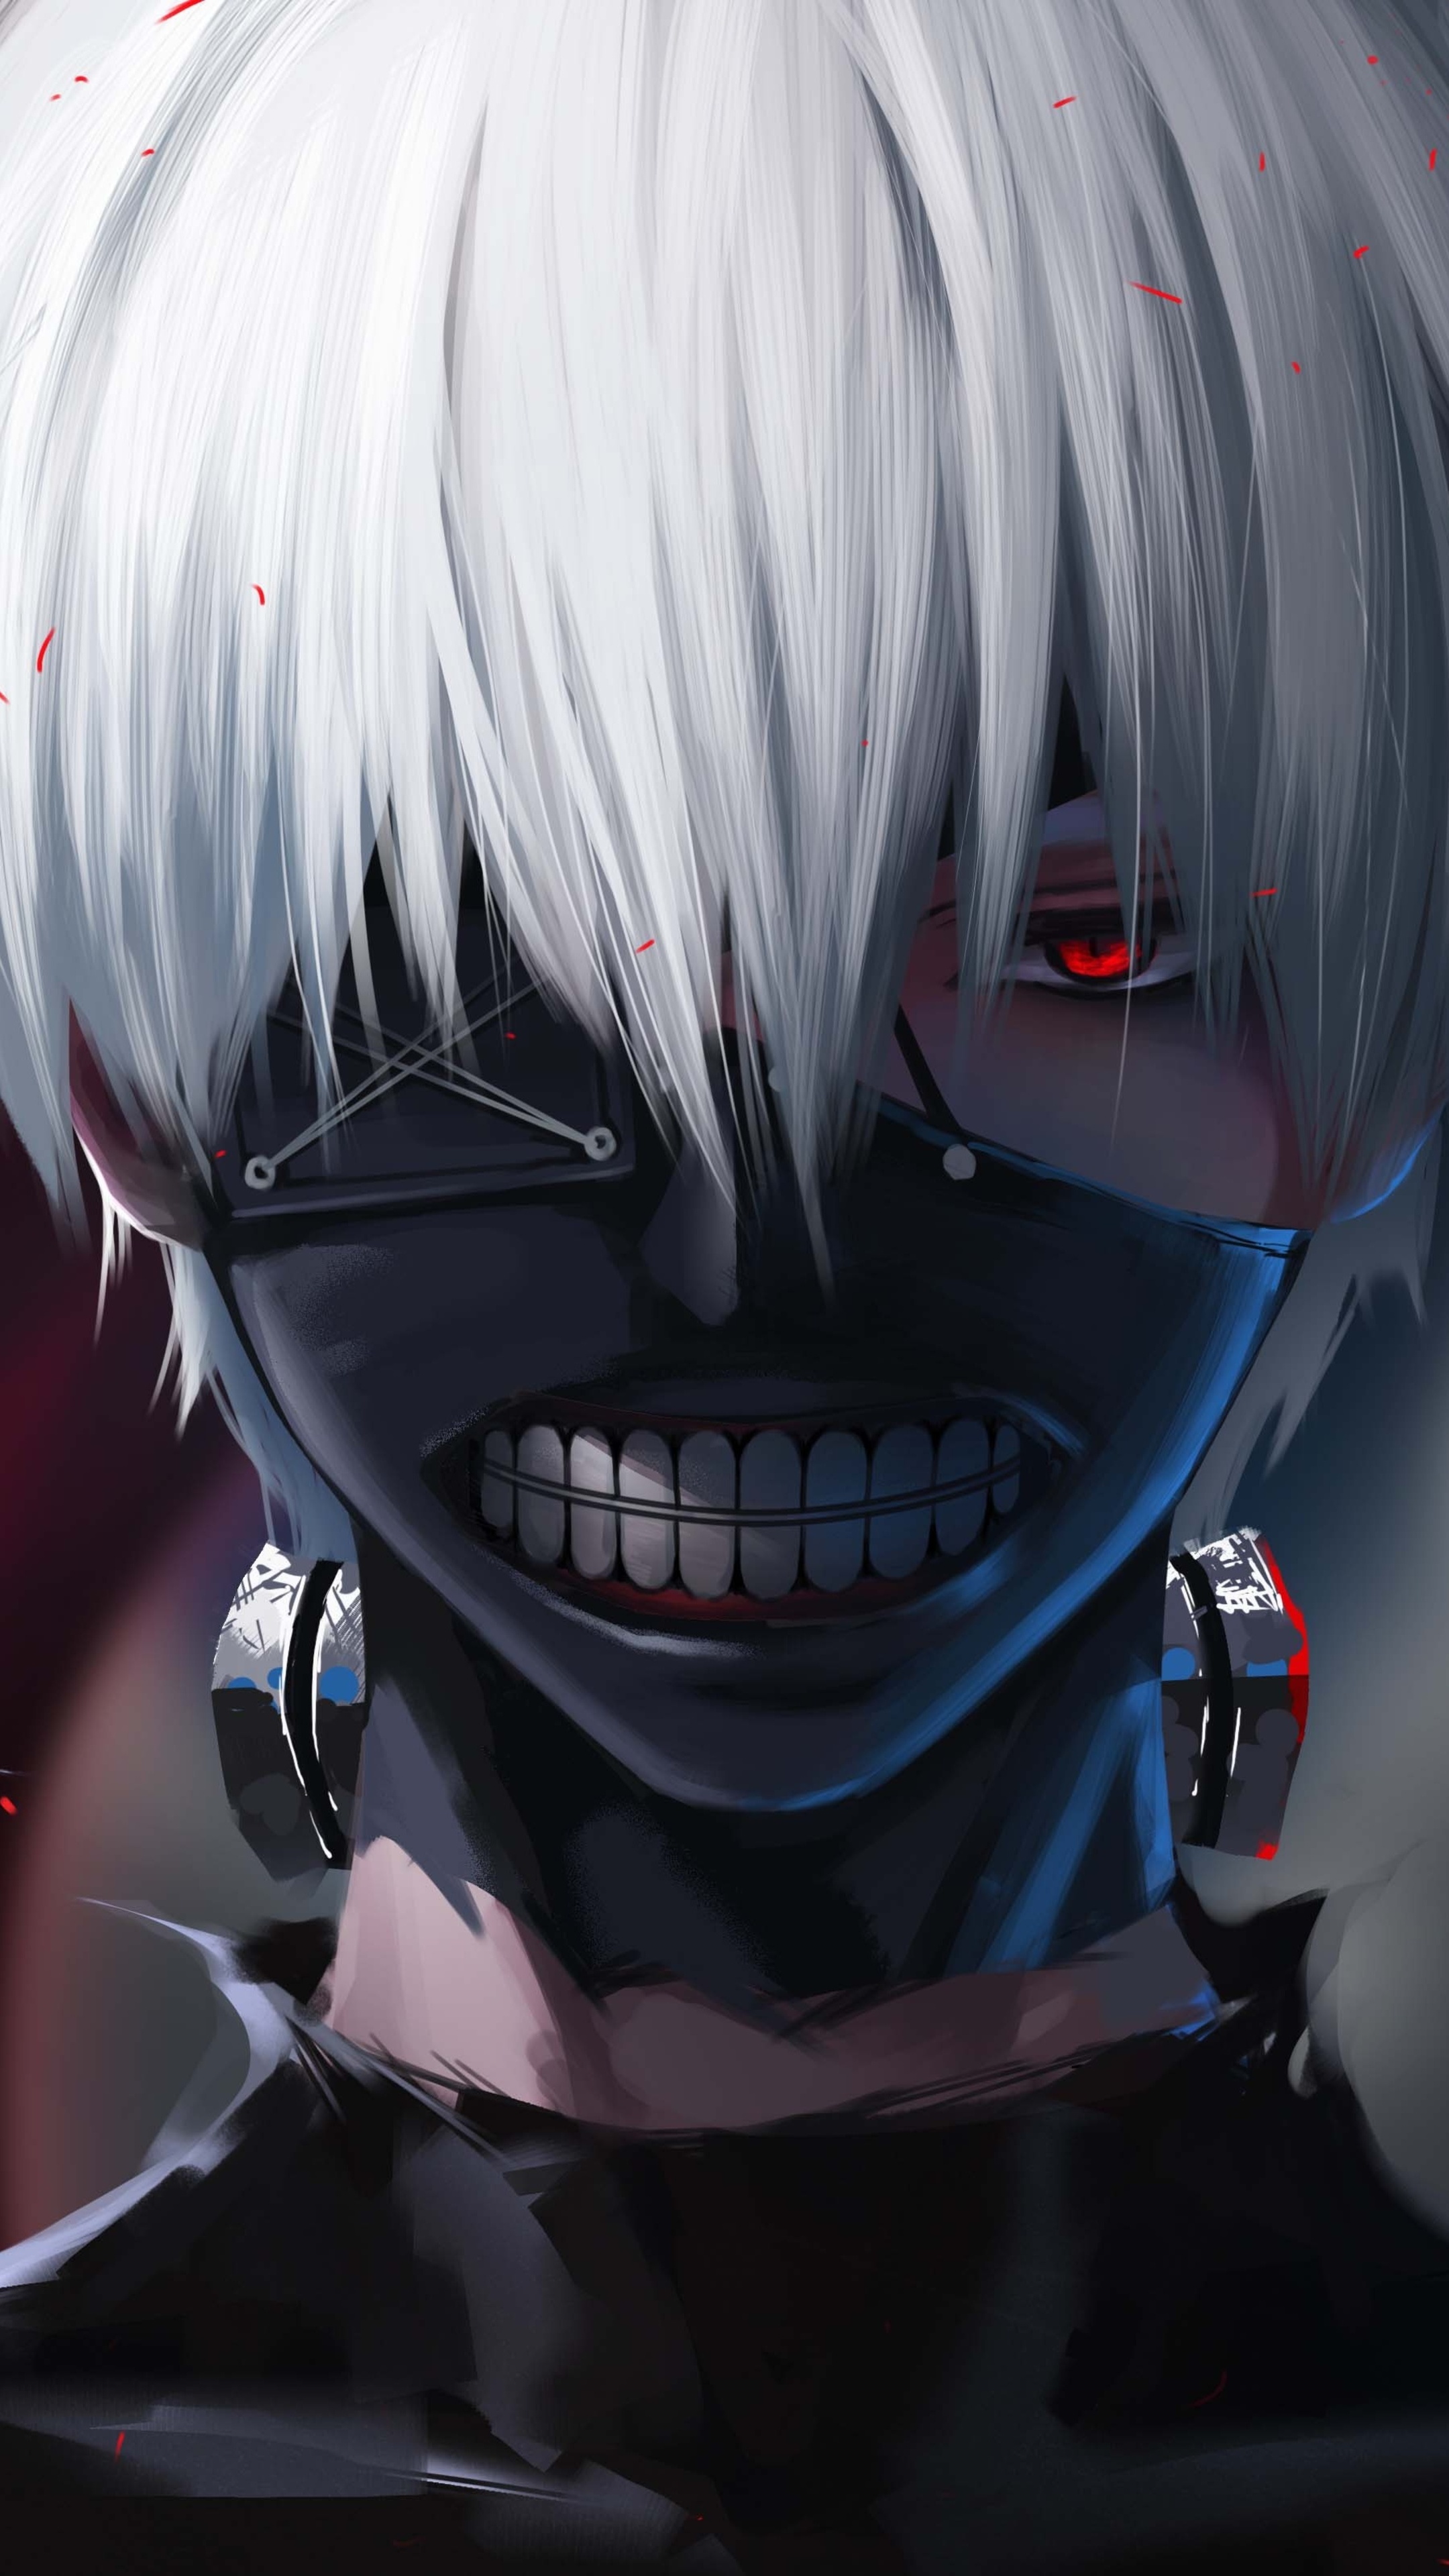 Tokyo Ghoul anime, 4K wallpapers, Sony Xperia devices, Visual brilliance, 2160x3840 4K Handy